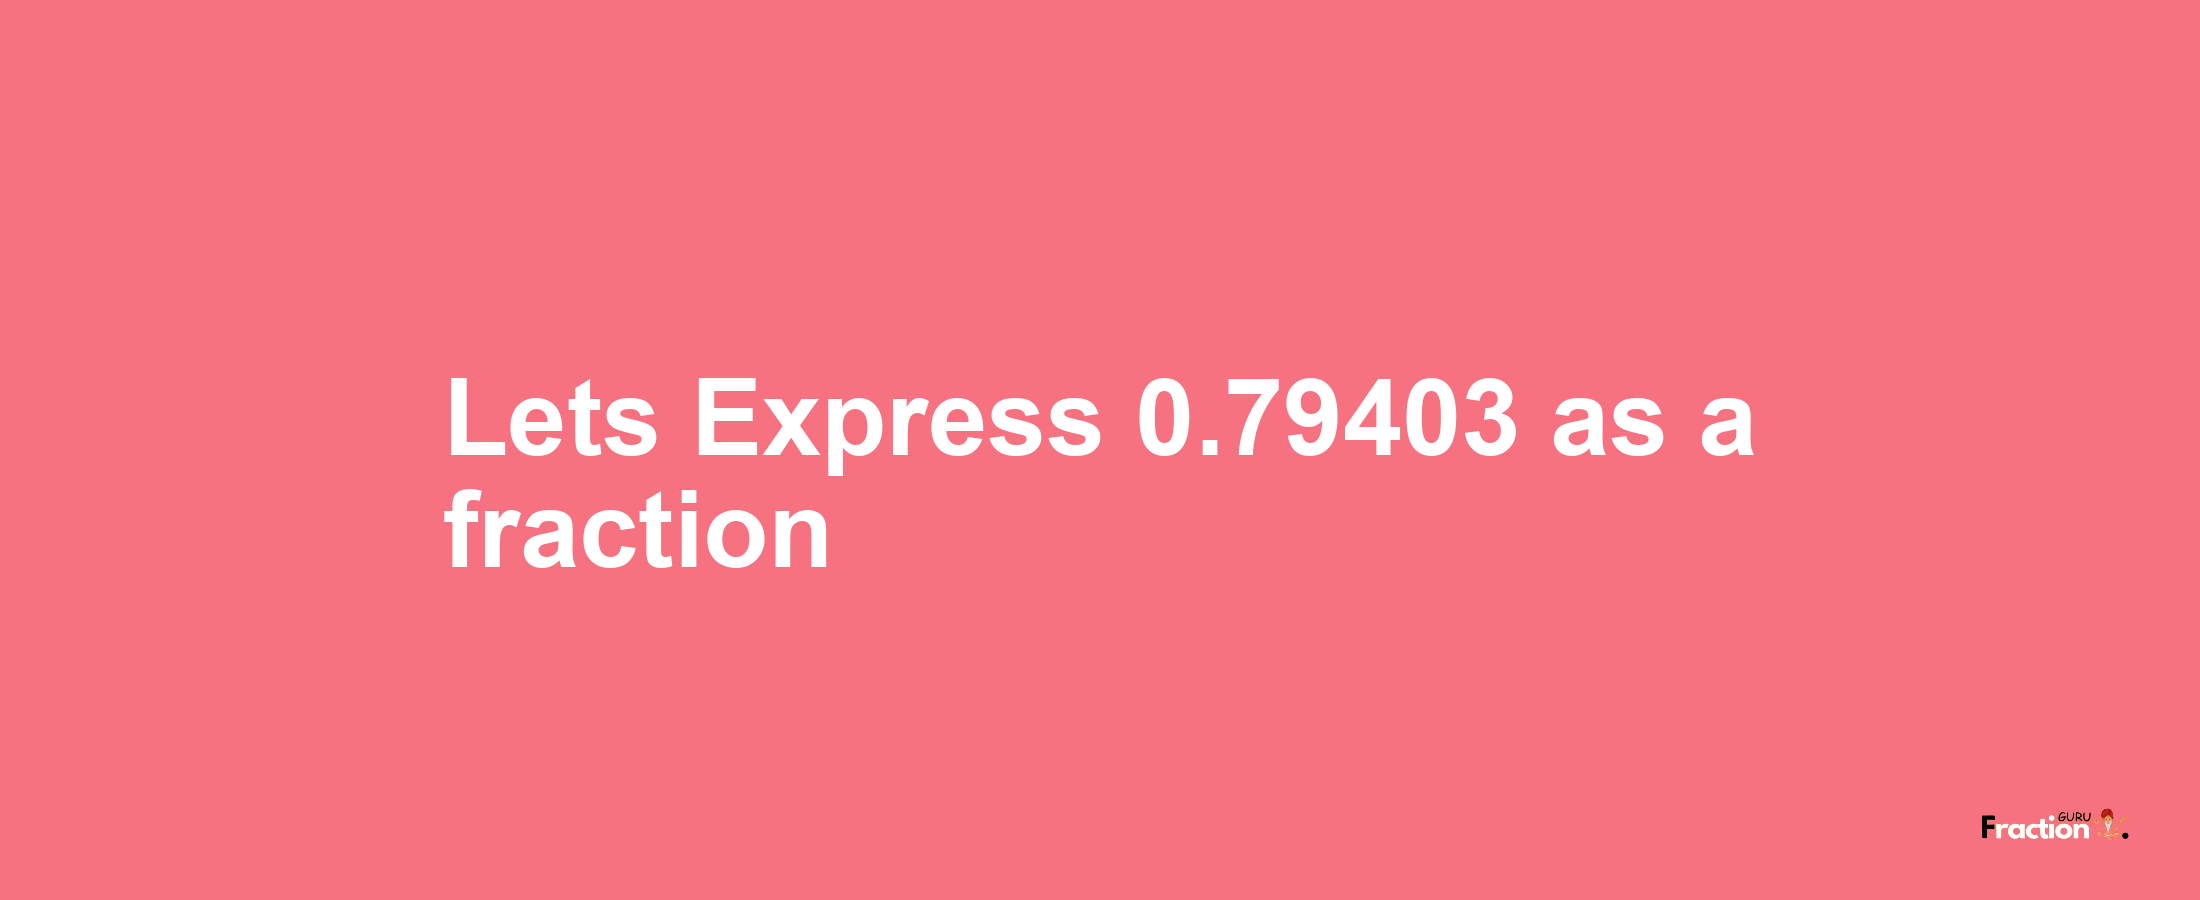 Lets Express 0.79403 as afraction